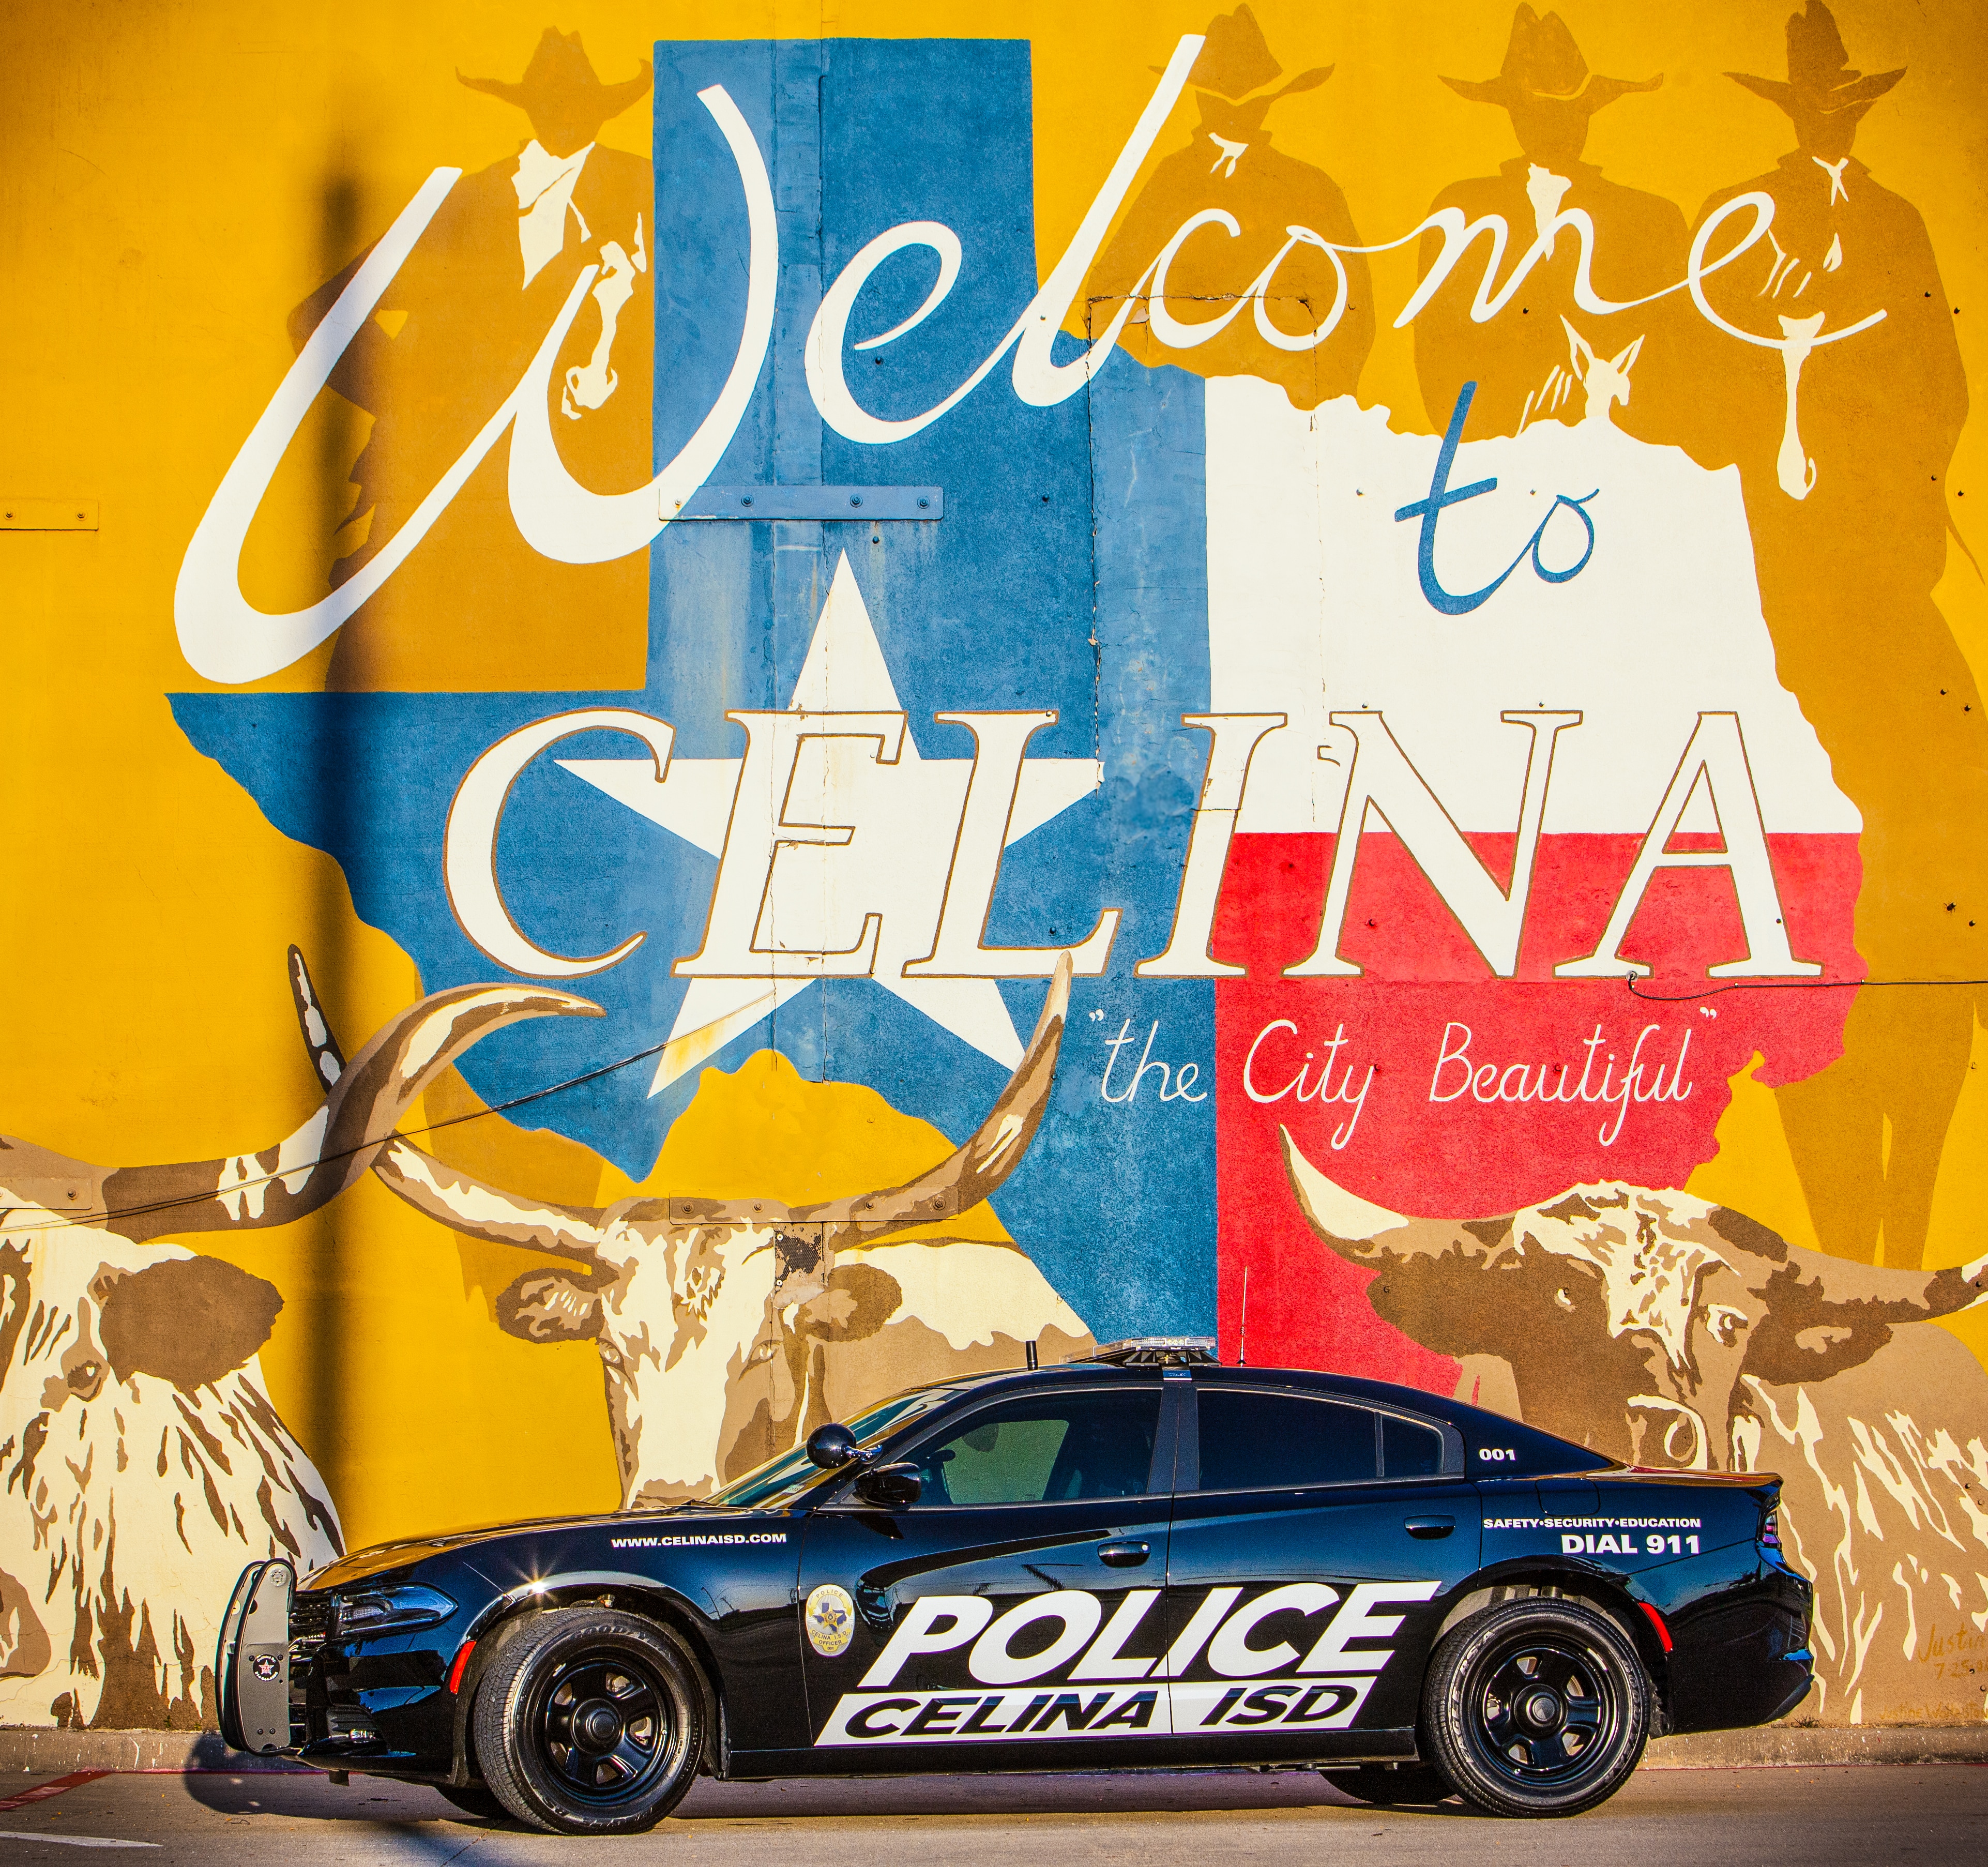 Celina, TX police car supplied by Dodge City of McKinney